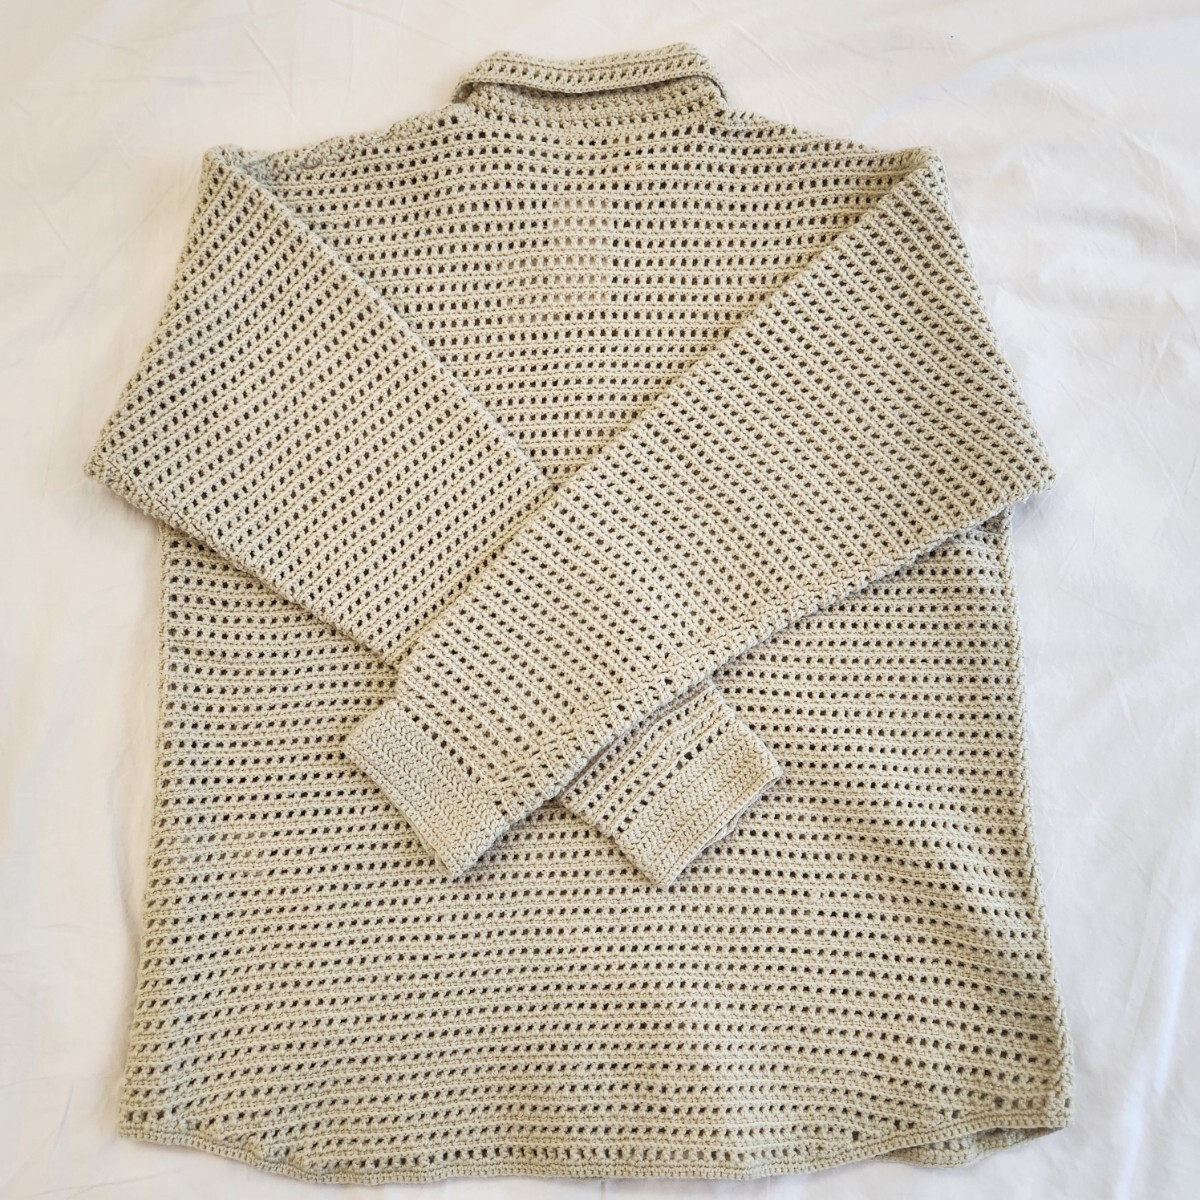 AURALEEo- Rally 23AW HAND CROCHET WOOL KNIT SHIRTS SIZE 4 А2ЗАСО1КВ crochet needle braided hand-knitted knitted cardigan 